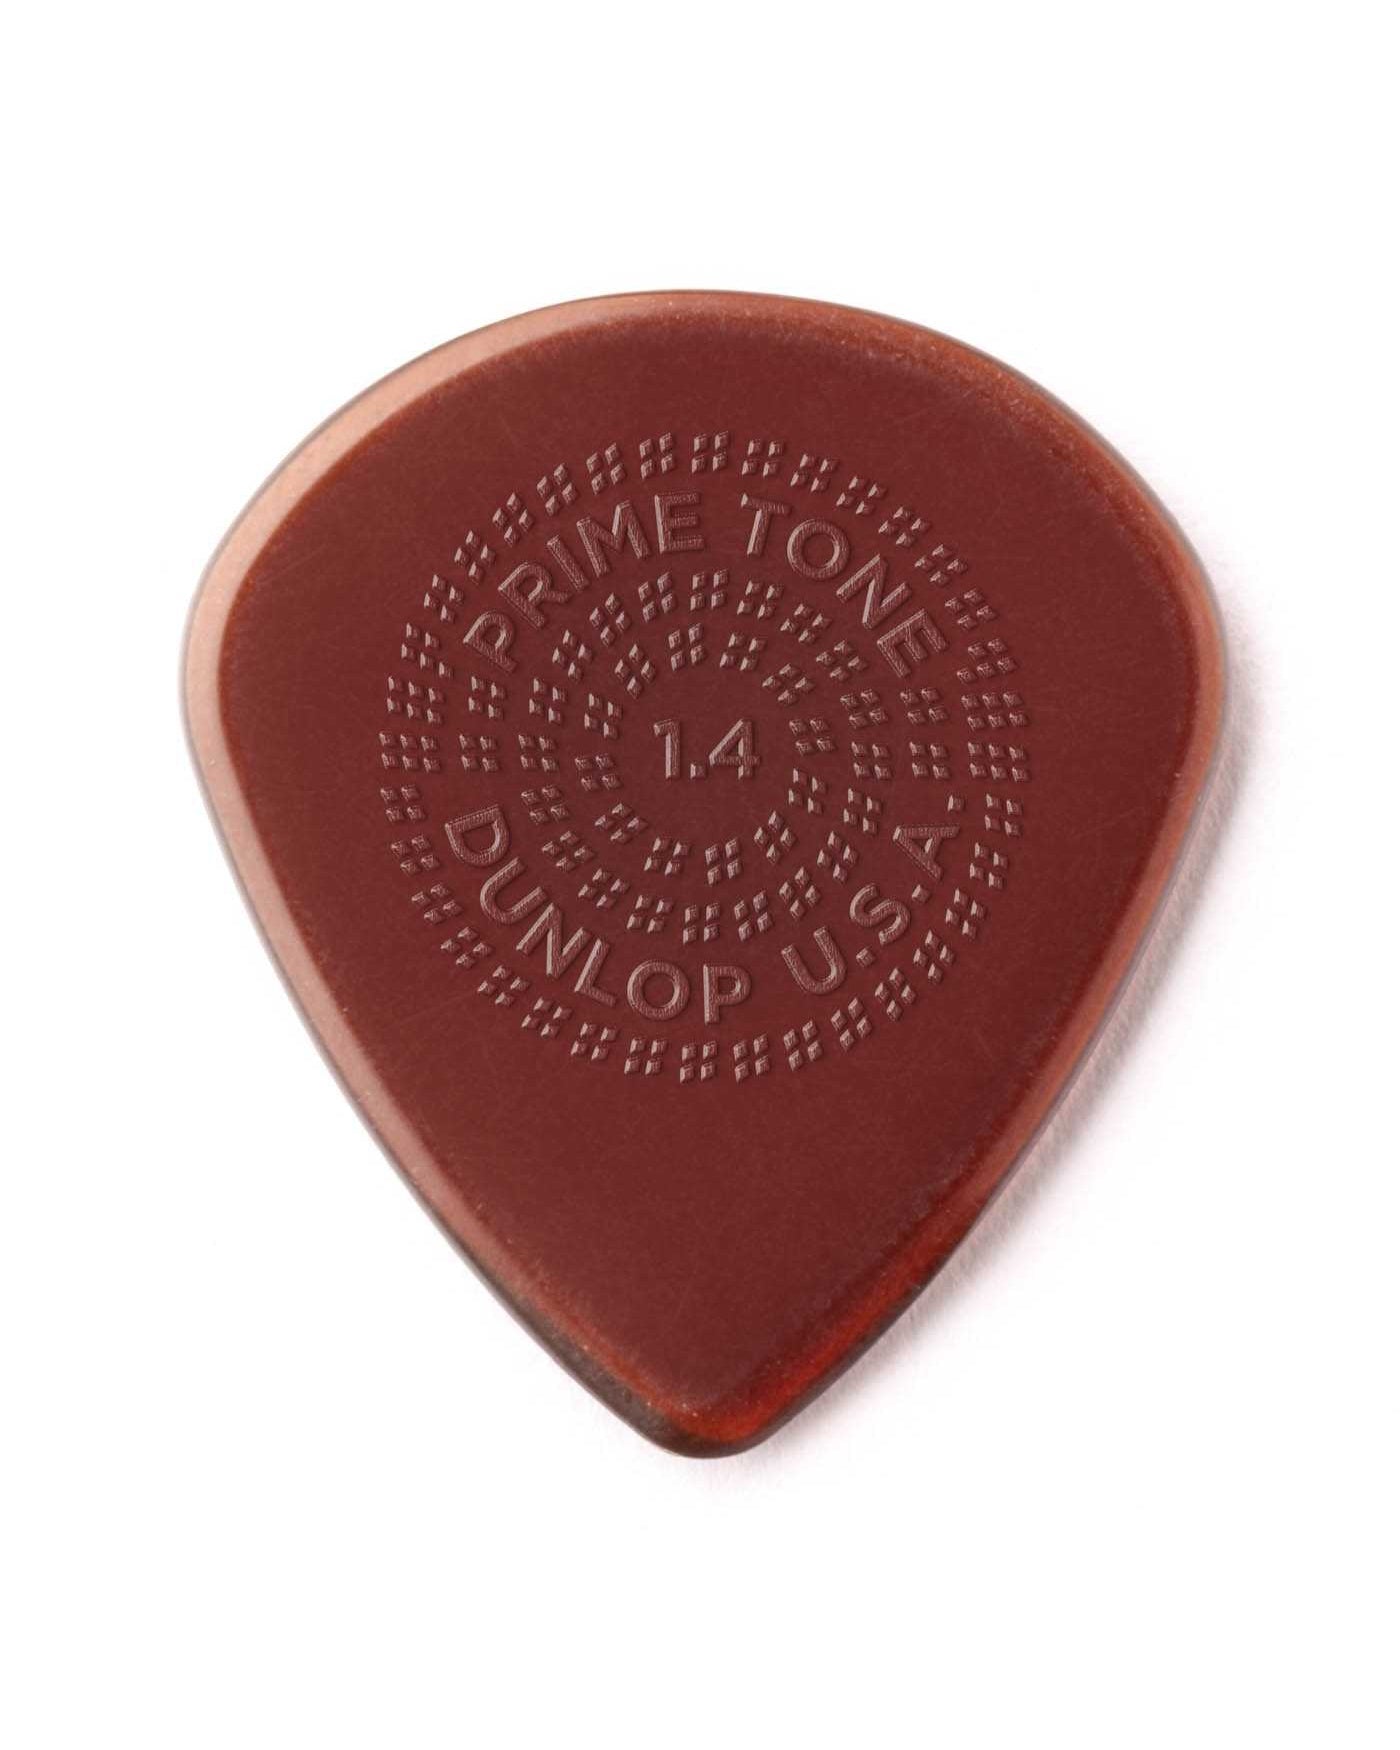 Image 1 of Dunlop Primetone Sculpted Plectra, Ultex Jazz III with Grip, 1.40MM Thick, Three Pack - SKU# PK518-140 : Product Type Accessories & Parts : Elderly Instruments